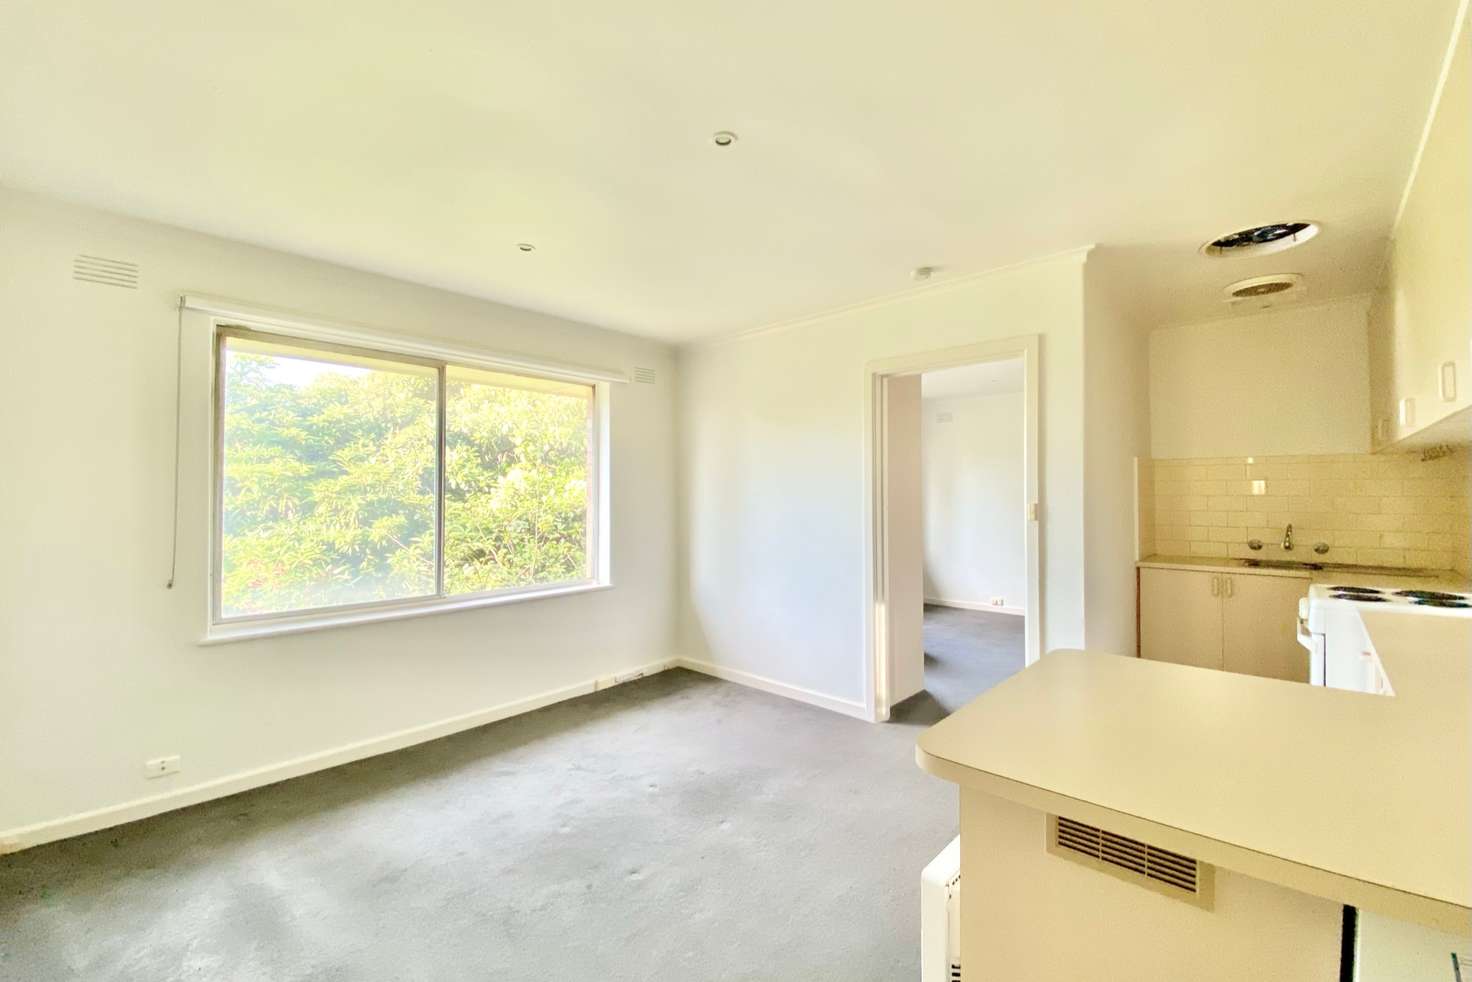 Main view of Homely apartment listing, 6/1 Looker Street, Murrumbeena VIC 3163